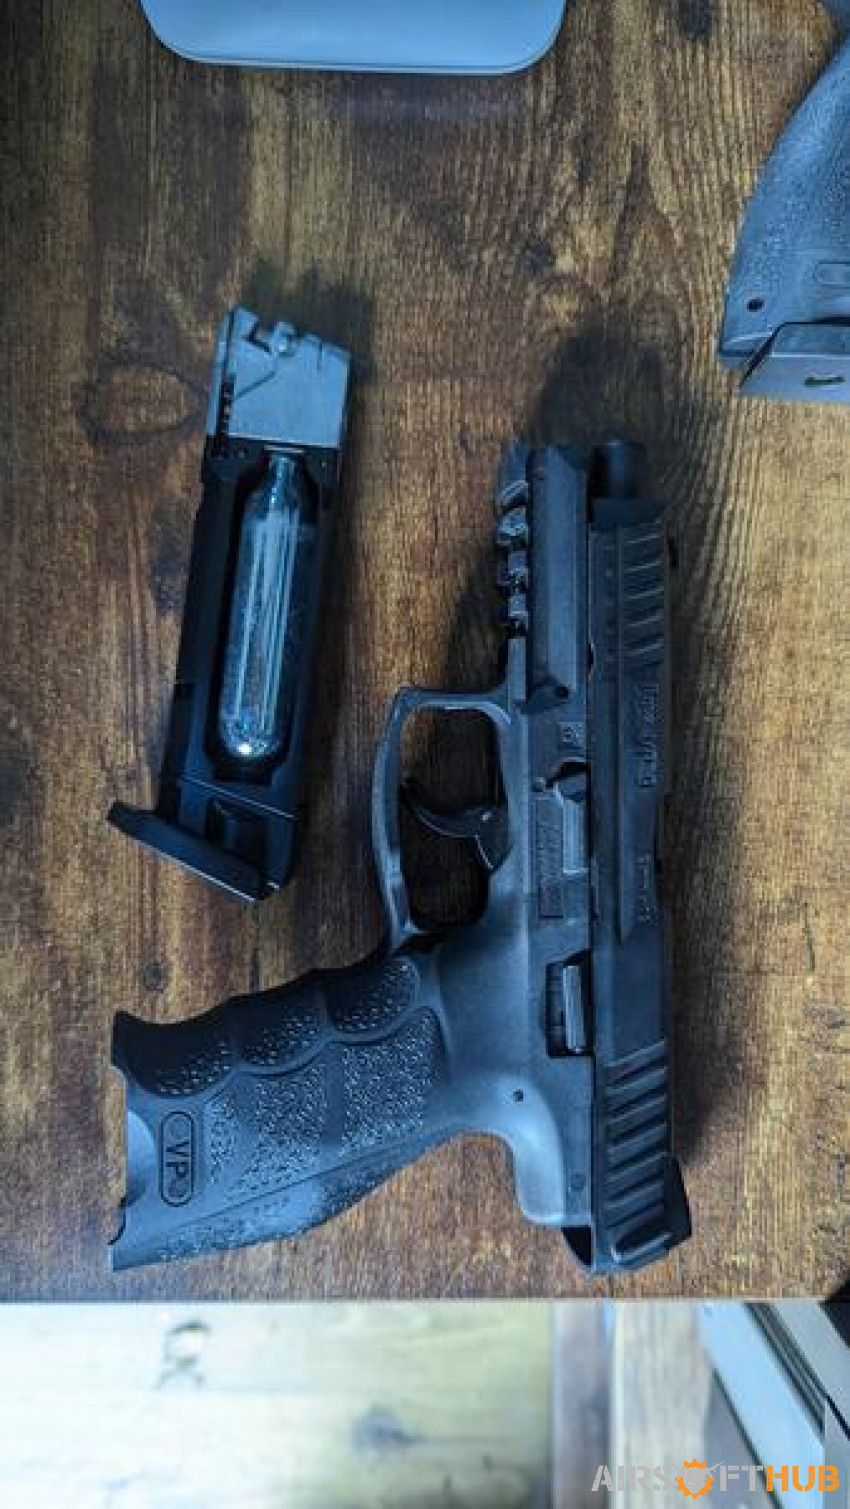 Hkvp9 co2 - Used airsoft equipment